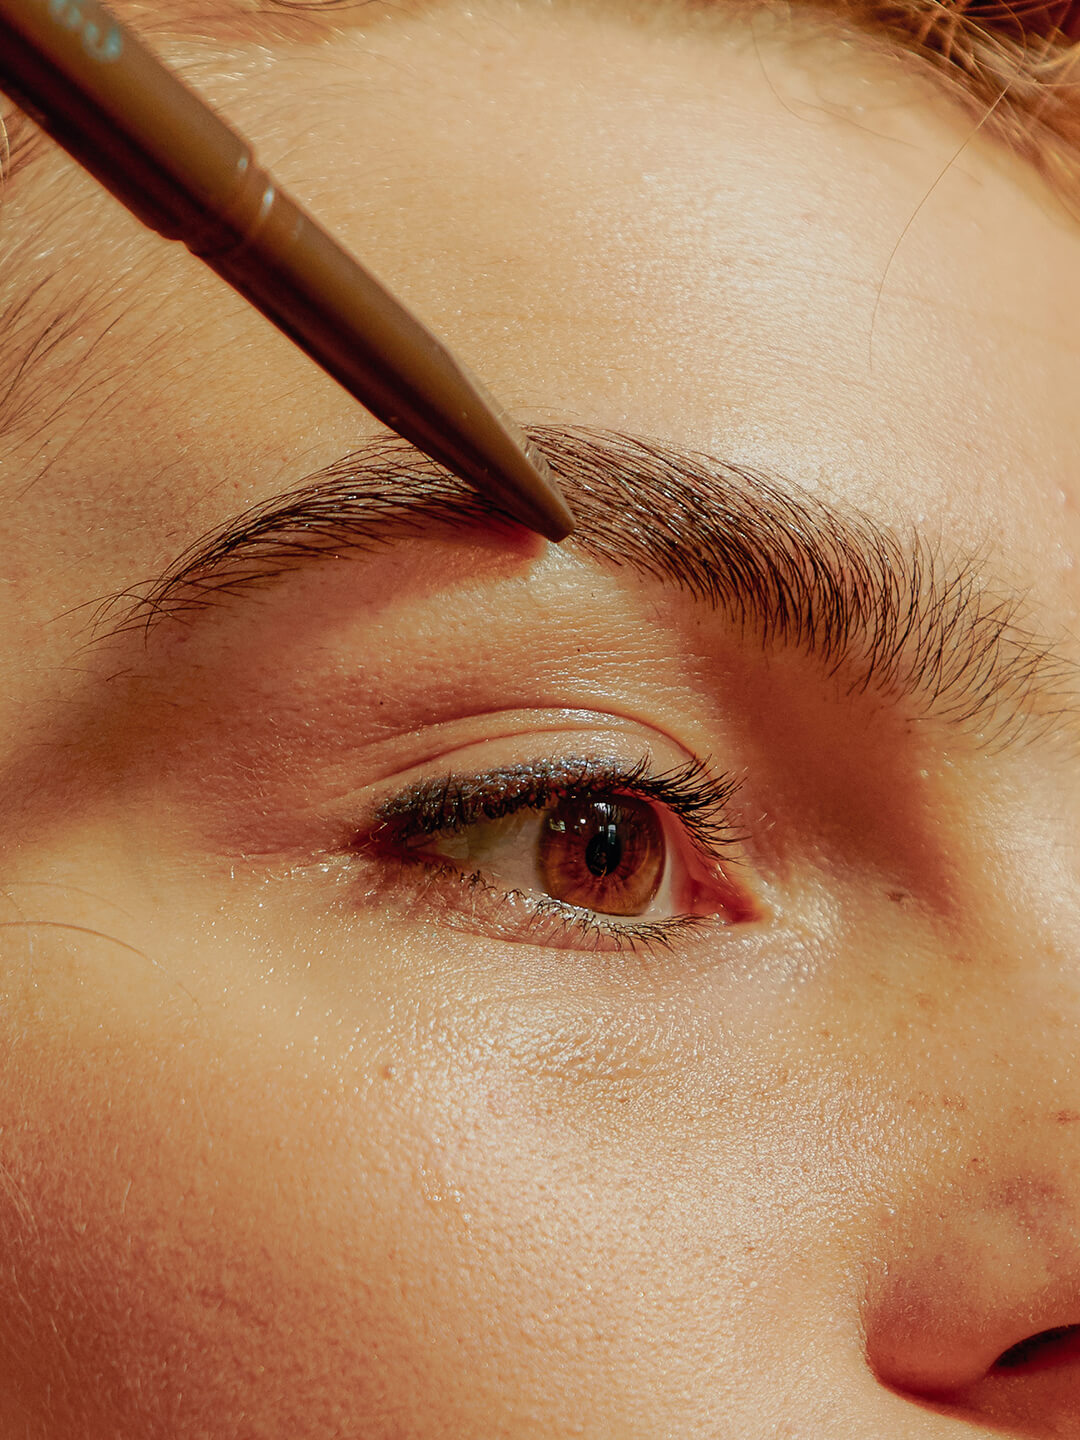 How to Your Eyebrows: 5 Steps to Your Best Brows | IPSY